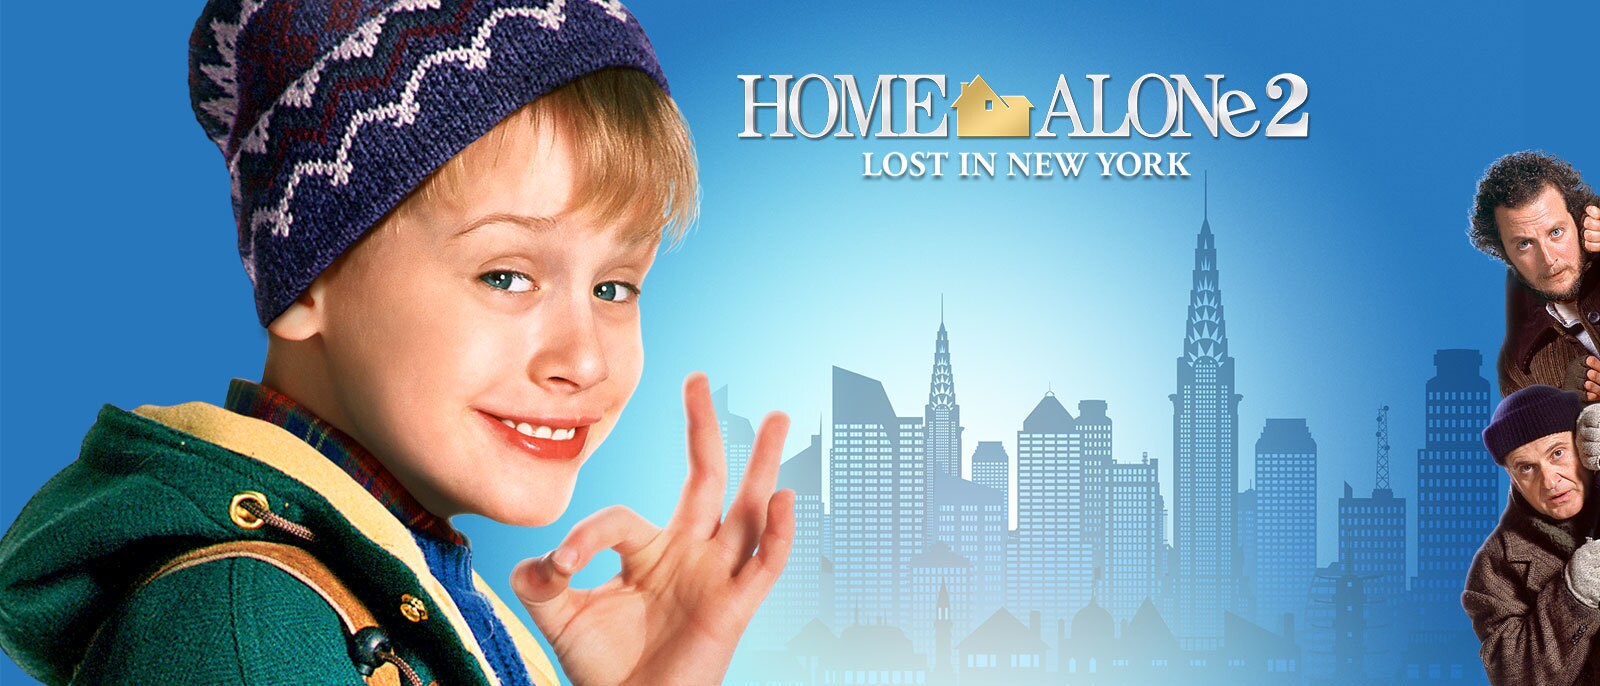 Home Alone 2: Lost in New York Hero